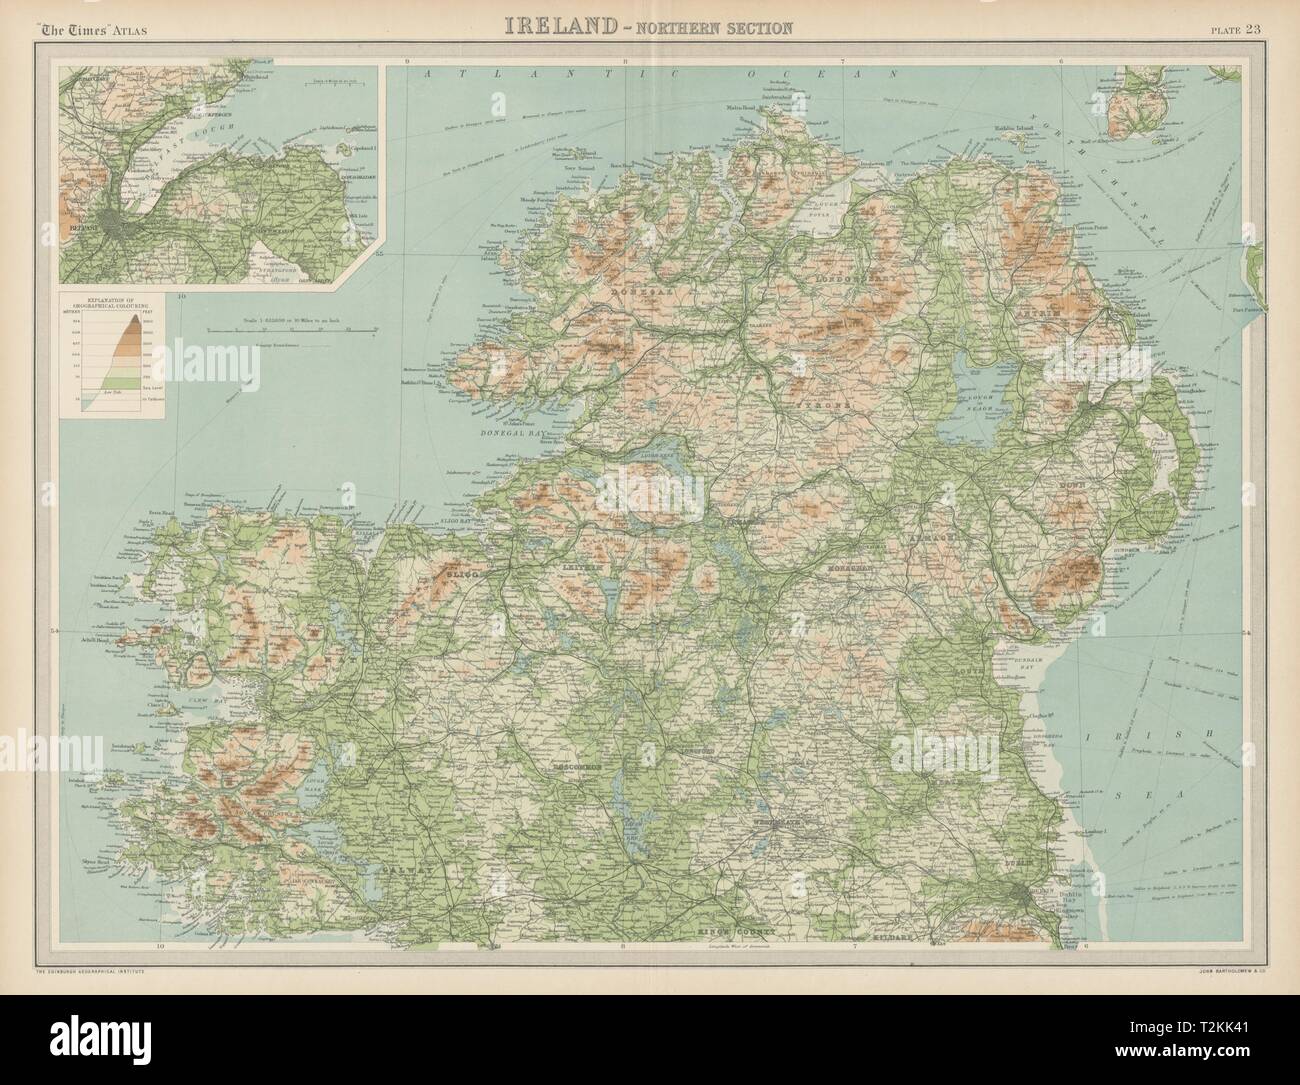 Ireland - northern section. Ulster. Relief & railways. THE TIMES 1922 old map Stock Photo